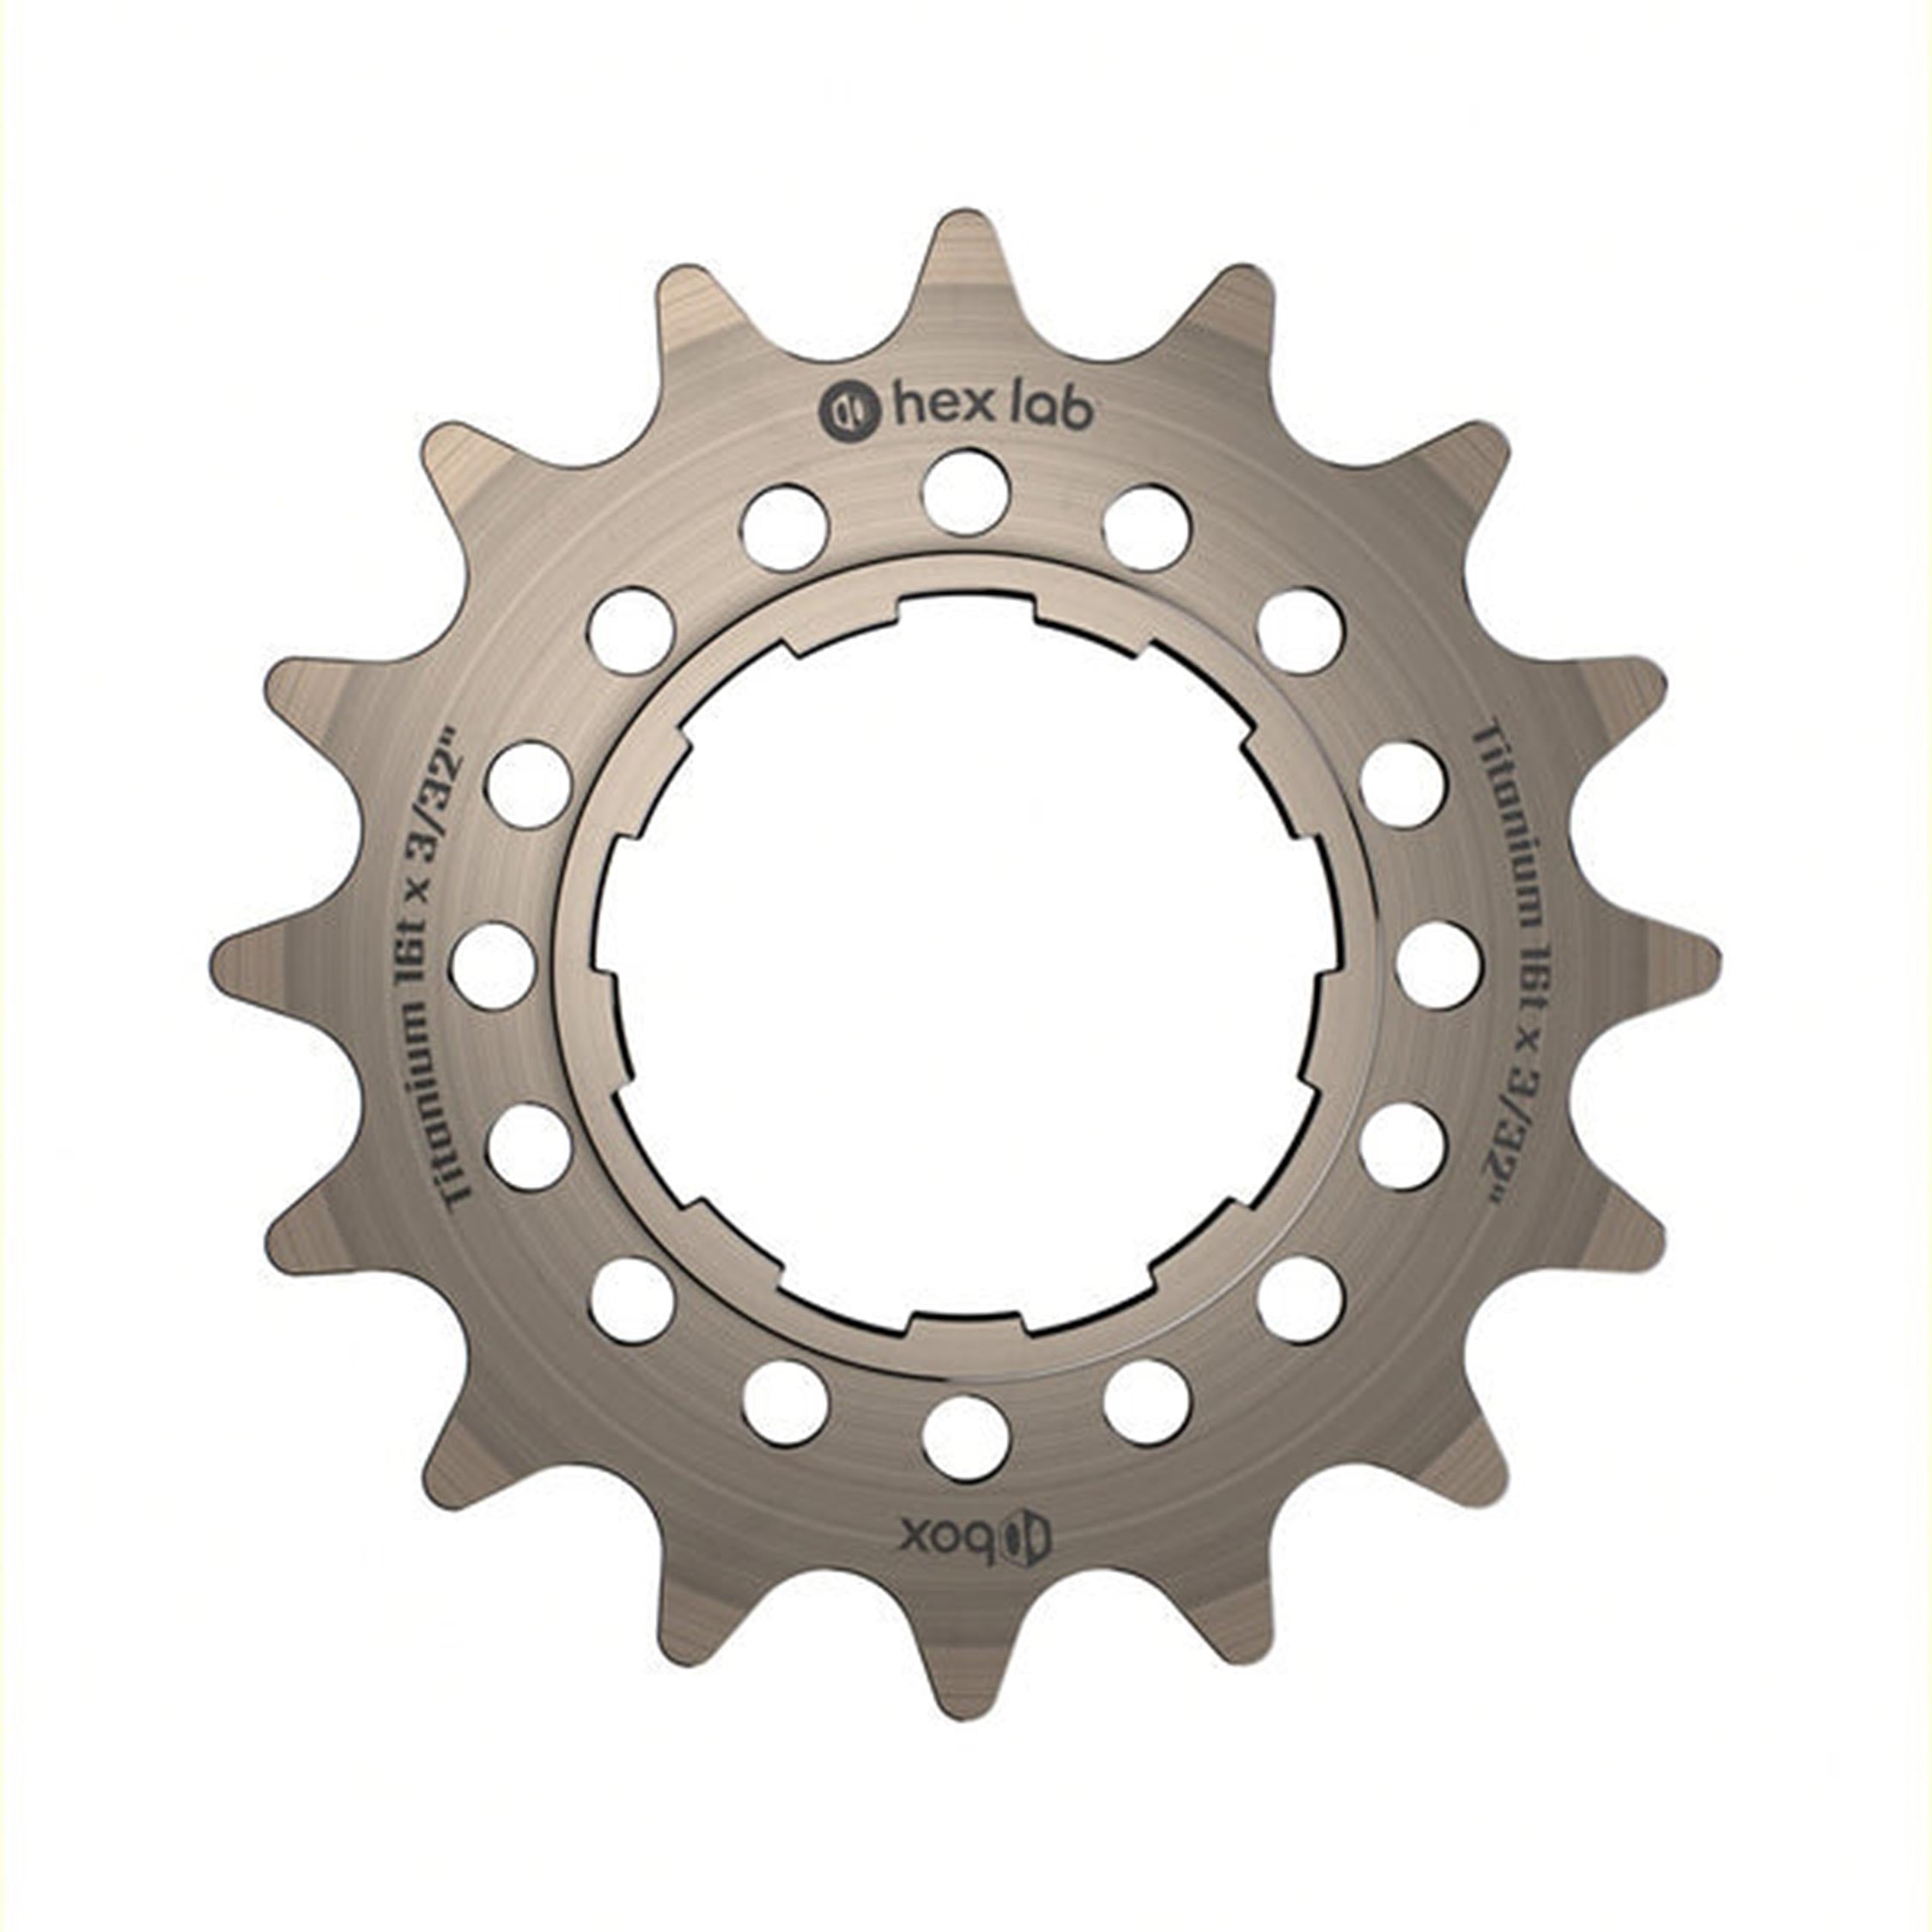 Box Hex Lab Titanium Cog chainring with hexagonal cut-outs and branding engravings.